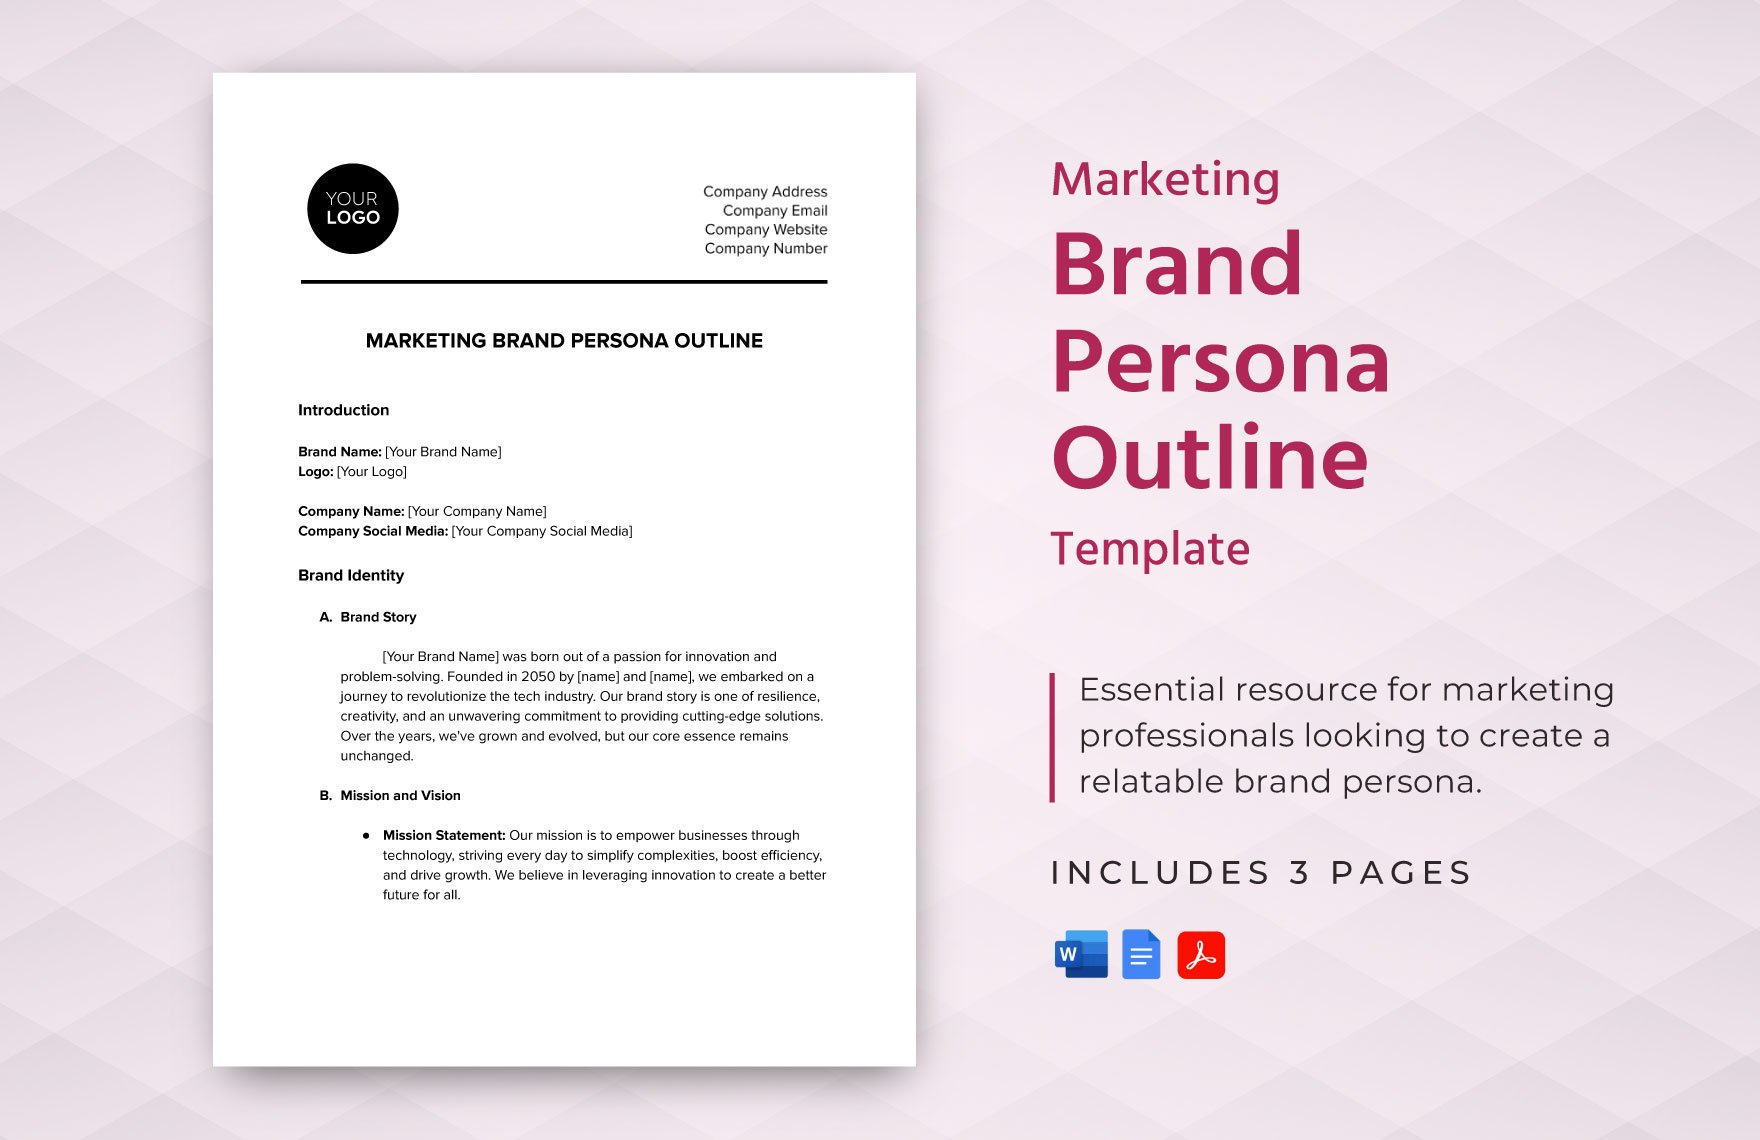 Marketing Brand Persona Outline Template in Word, Google Docs, PDF